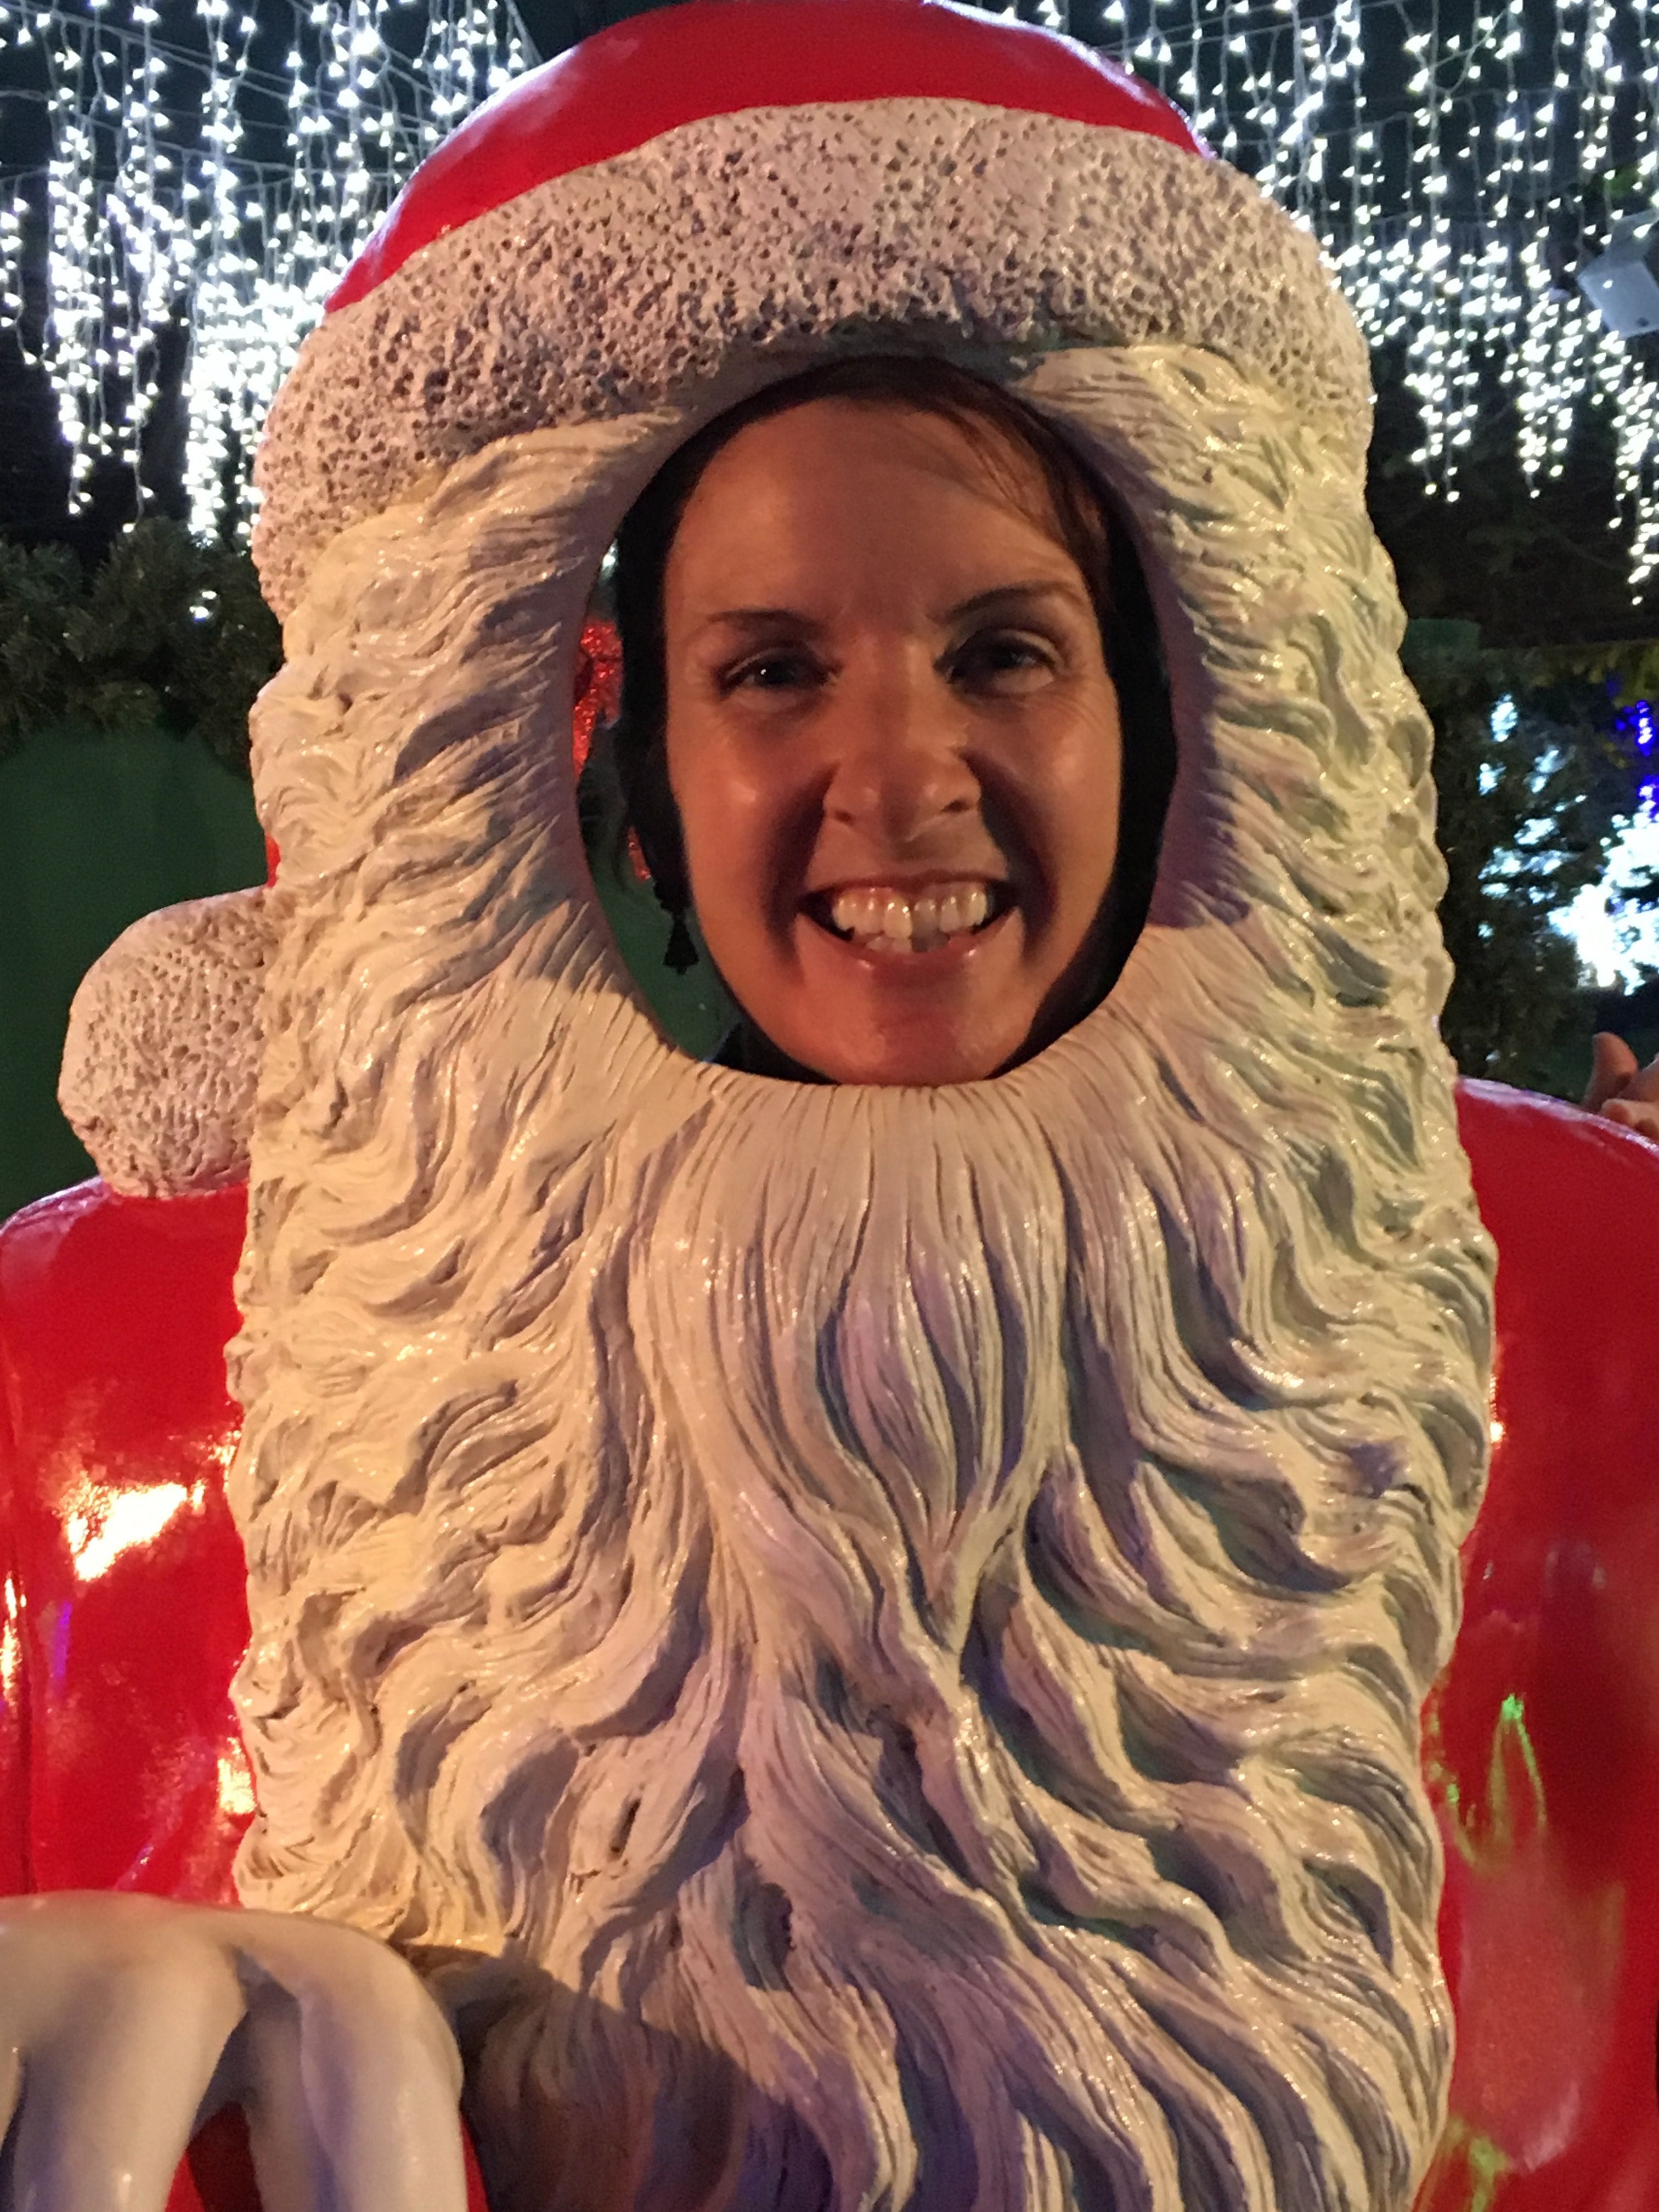 Hunter Valley Gardens Christmas Lights 2018-2019 Public Day Night Tour Image -5c149f6ad9155